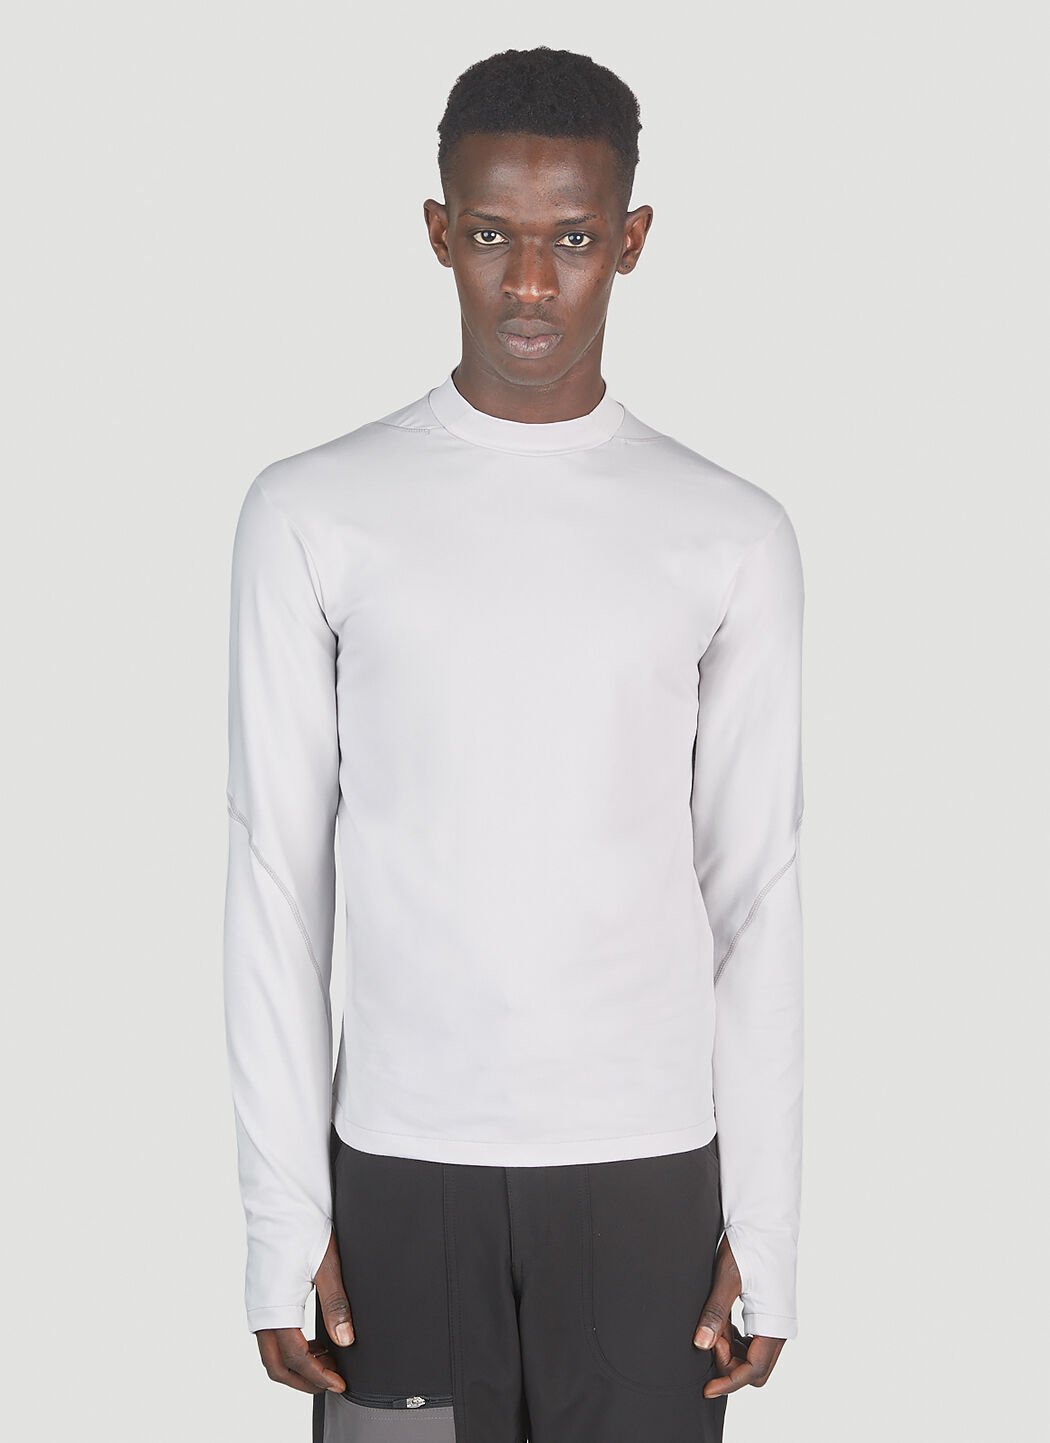 POST ARCHIVE FACTION (PAF) 5.0 Long Sleeve Top | LN-CC